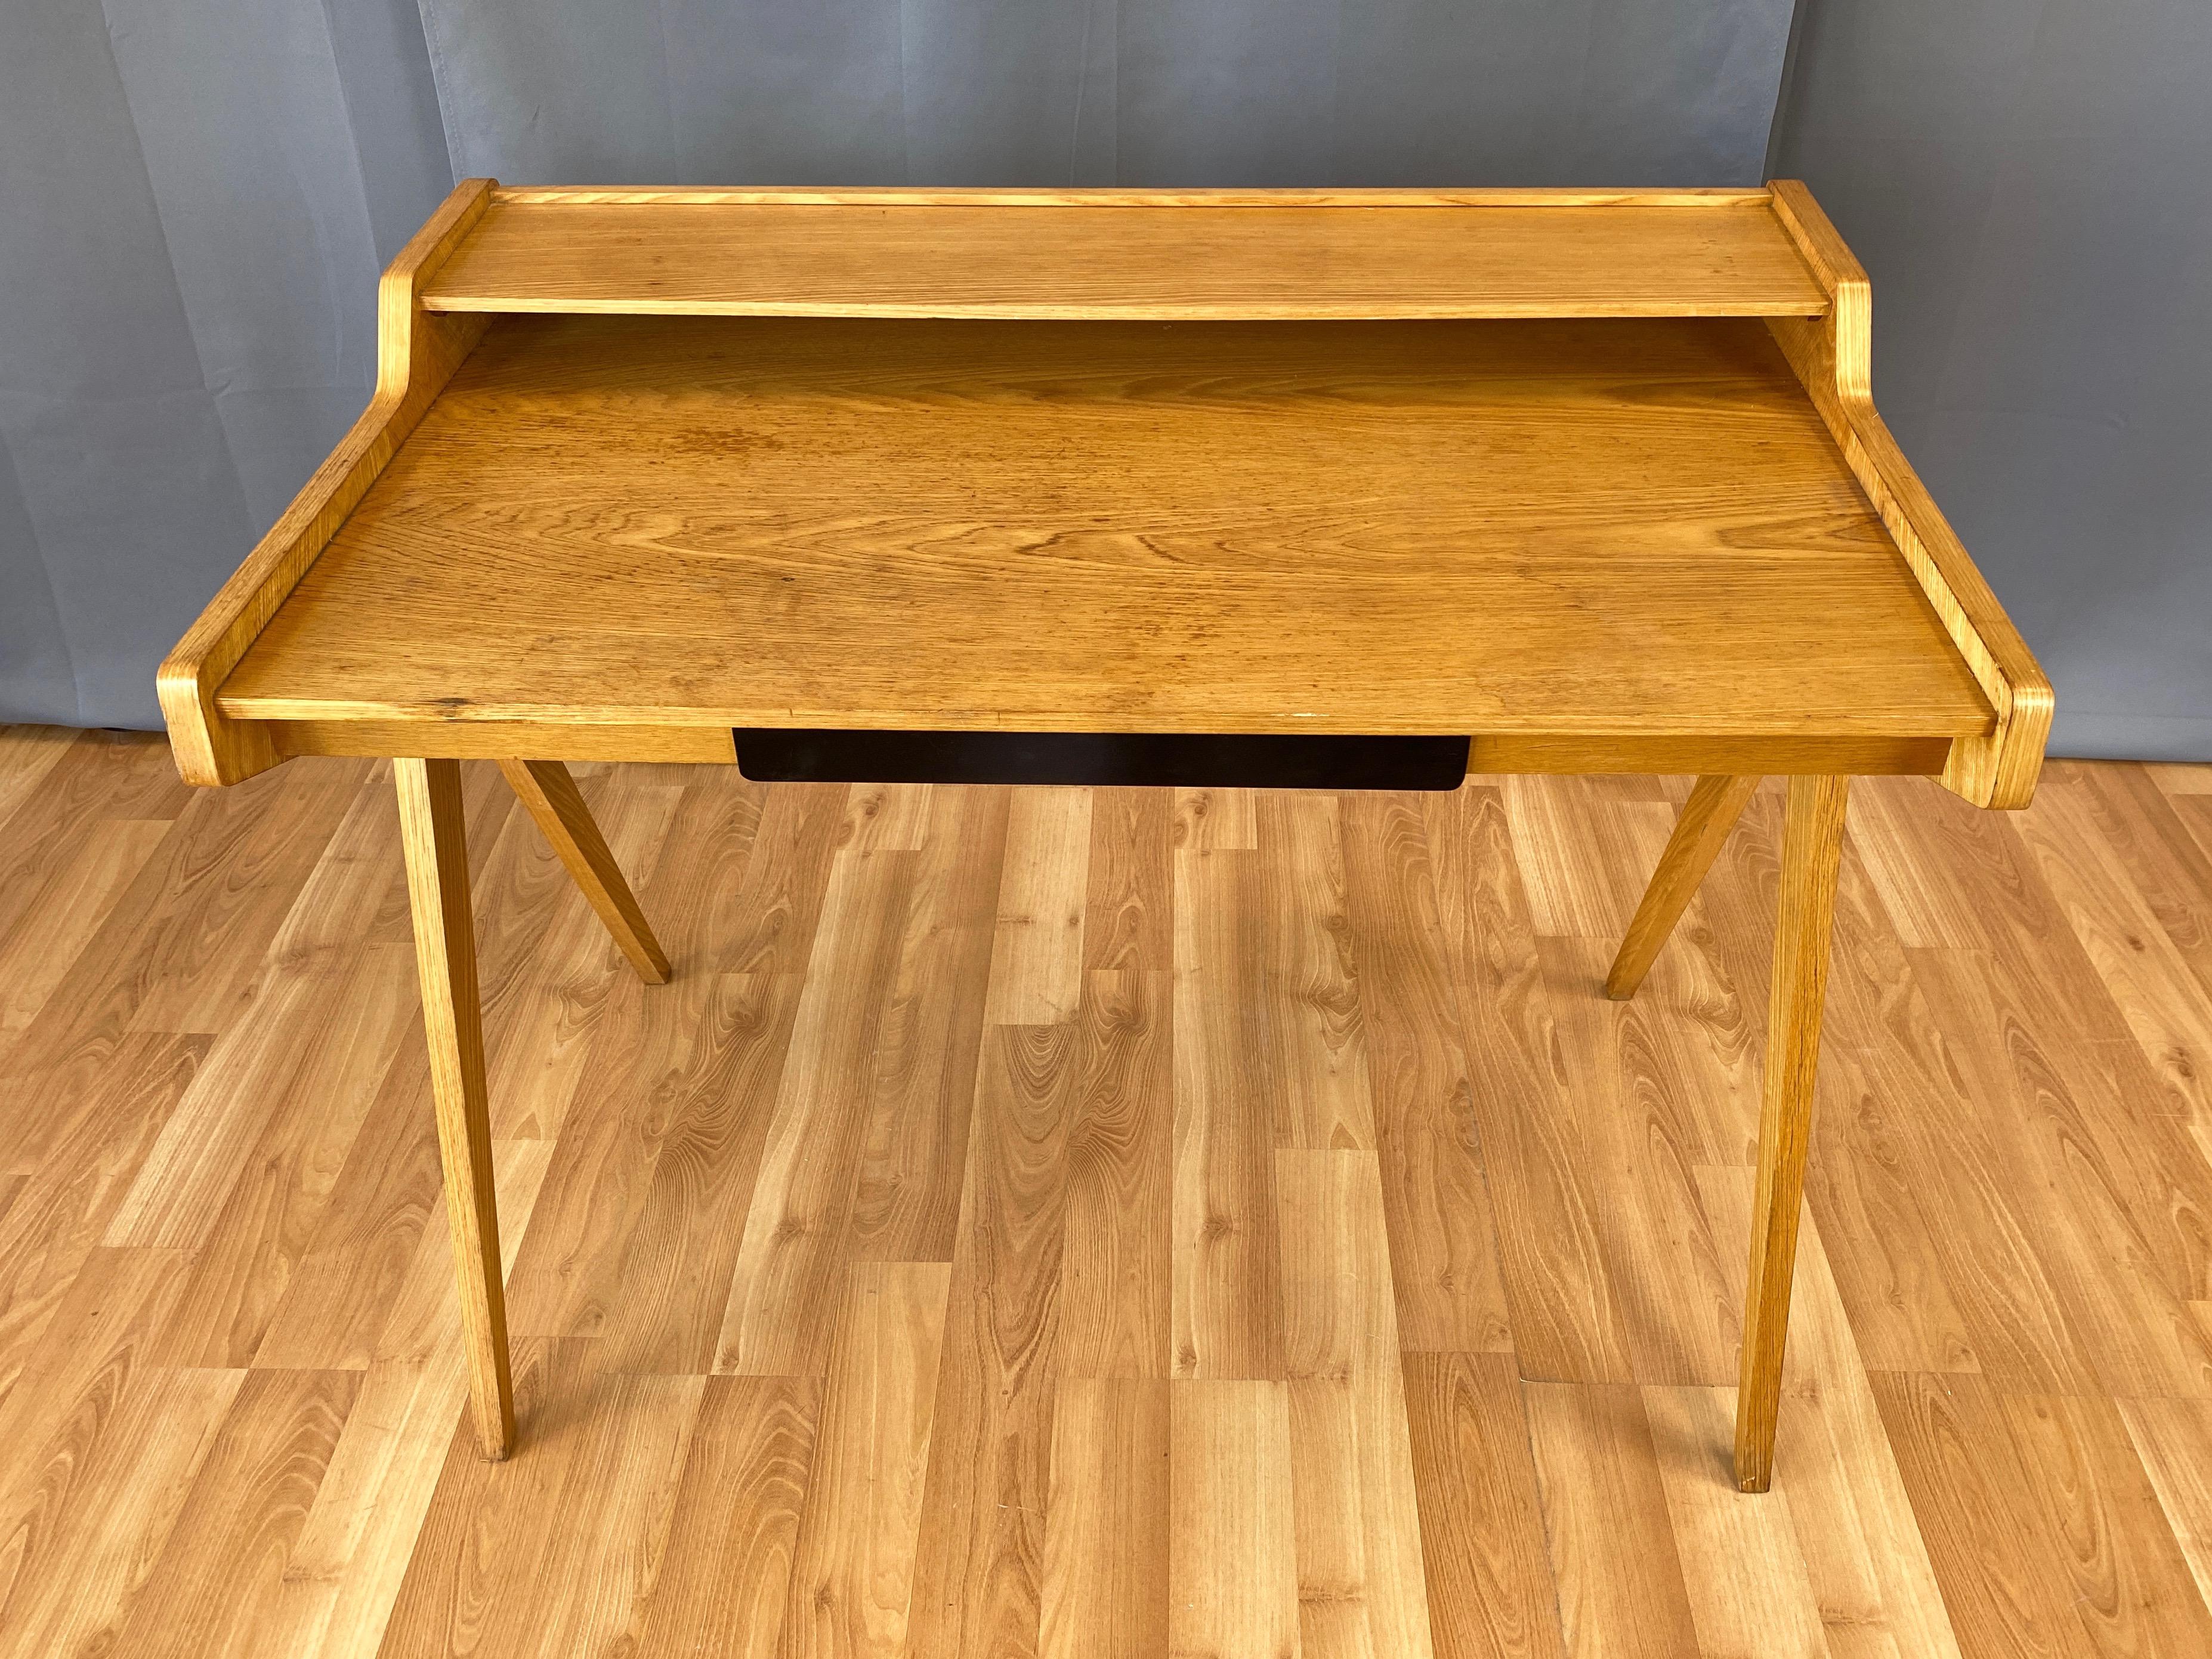 German Helmut Magg for WK Möbel Elm Compass Leg Desk with Drawer and Cubby, 1950s